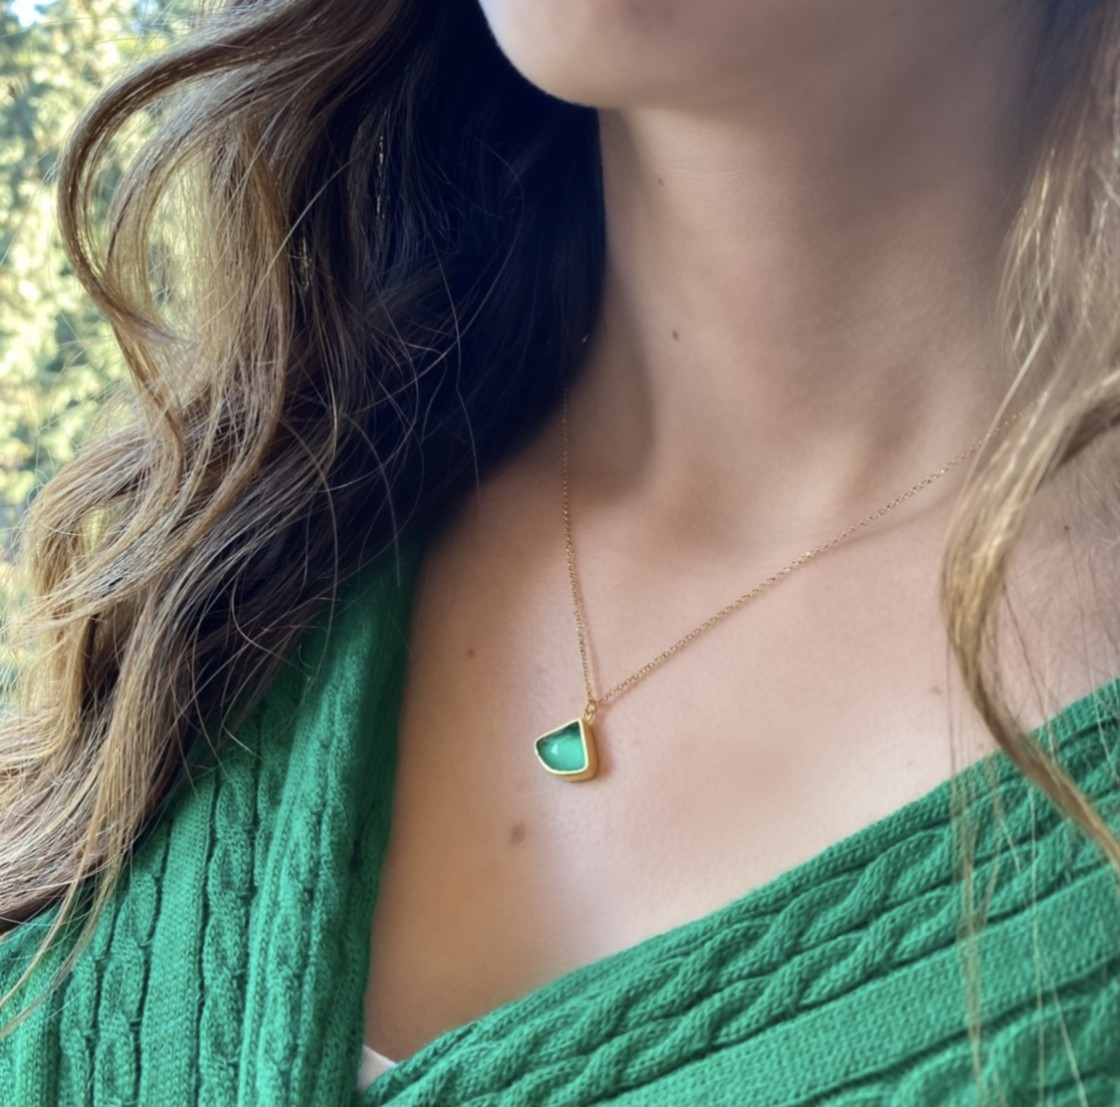 Elegant and beautiful pendant with a bezel set triangular green agate-quartz doublet stone on a delicate gold chain.